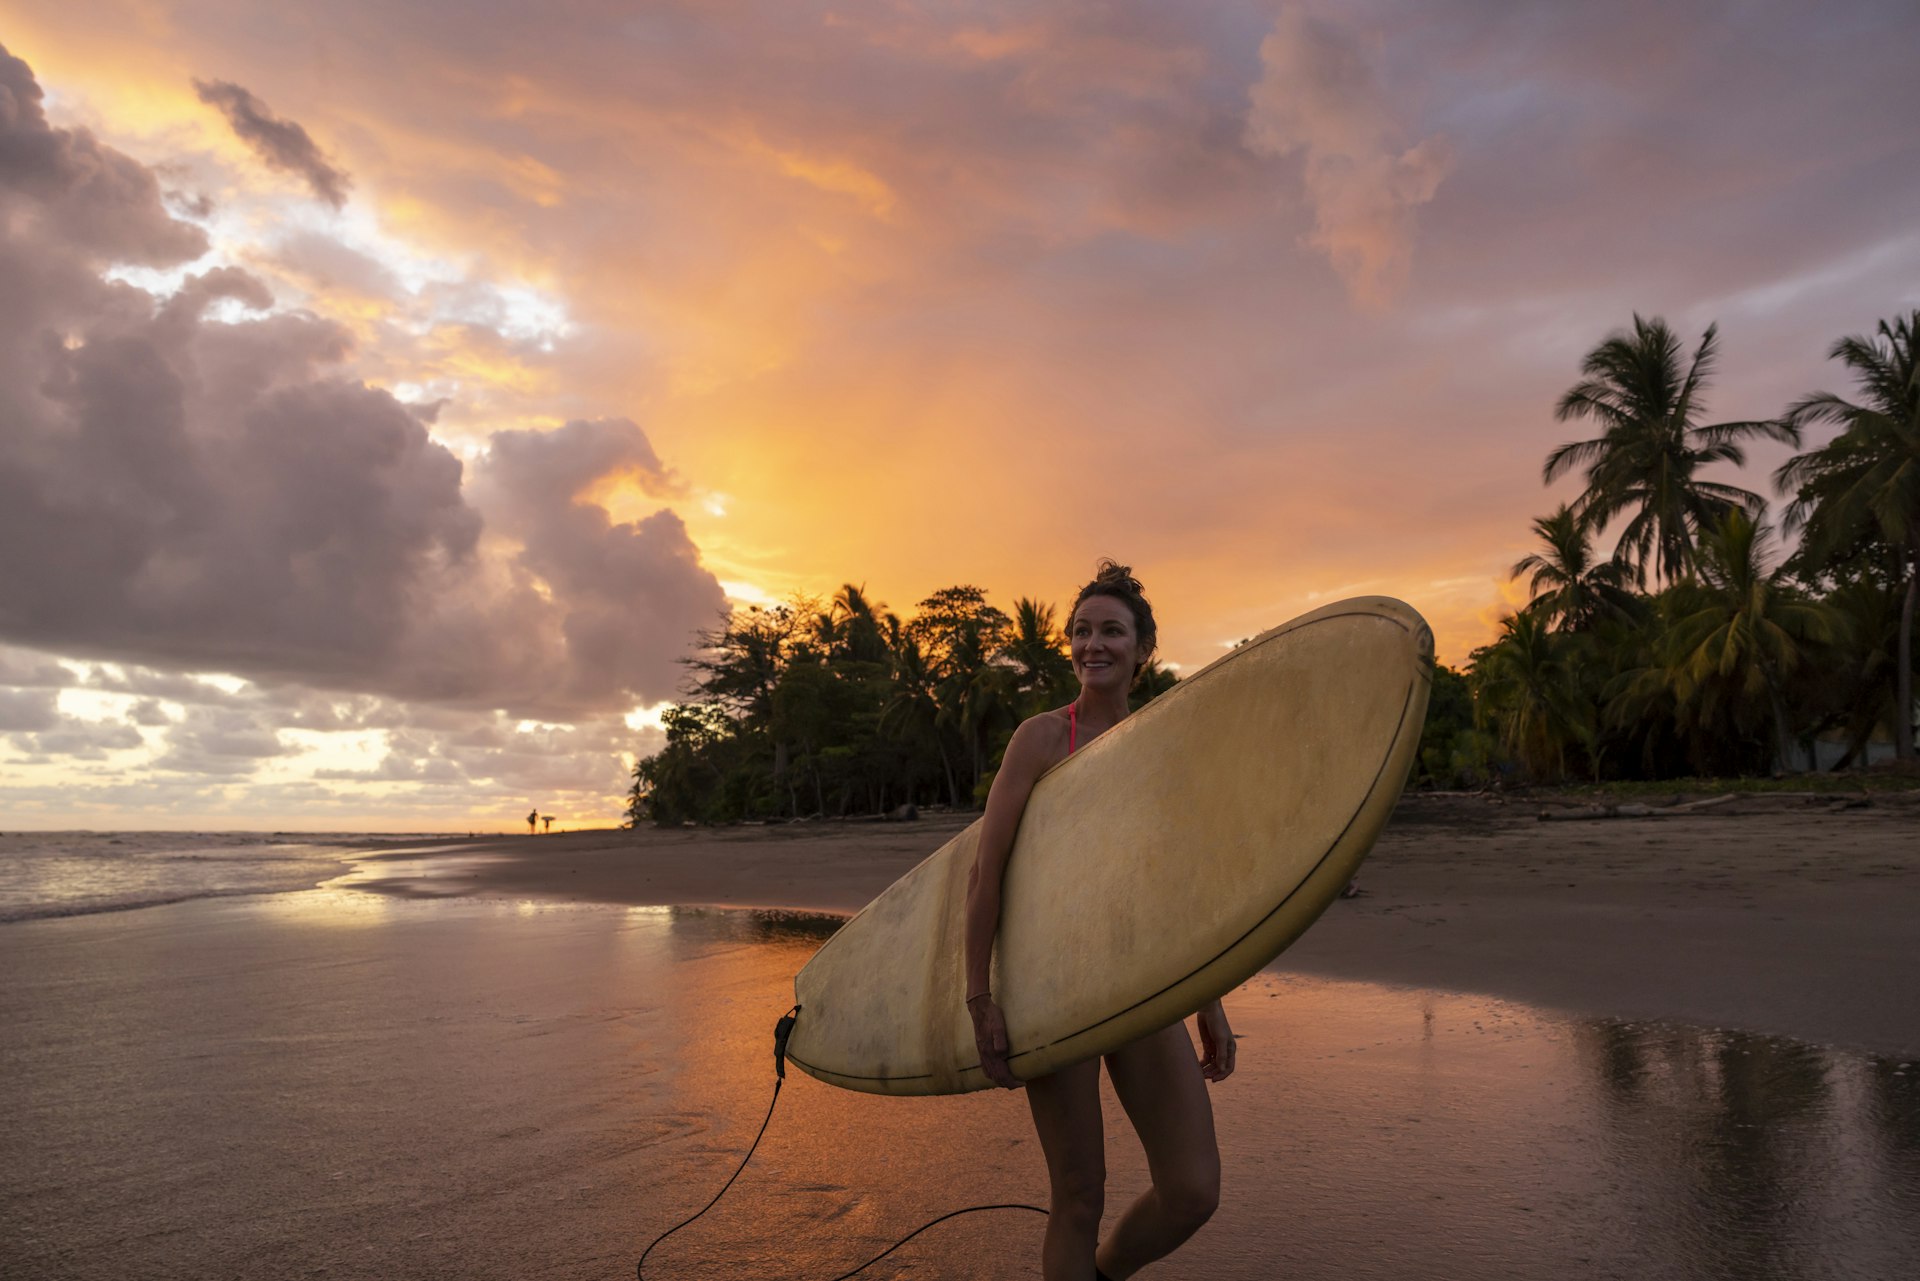 A woman carries a surfboard on Playa Jaco at sunset